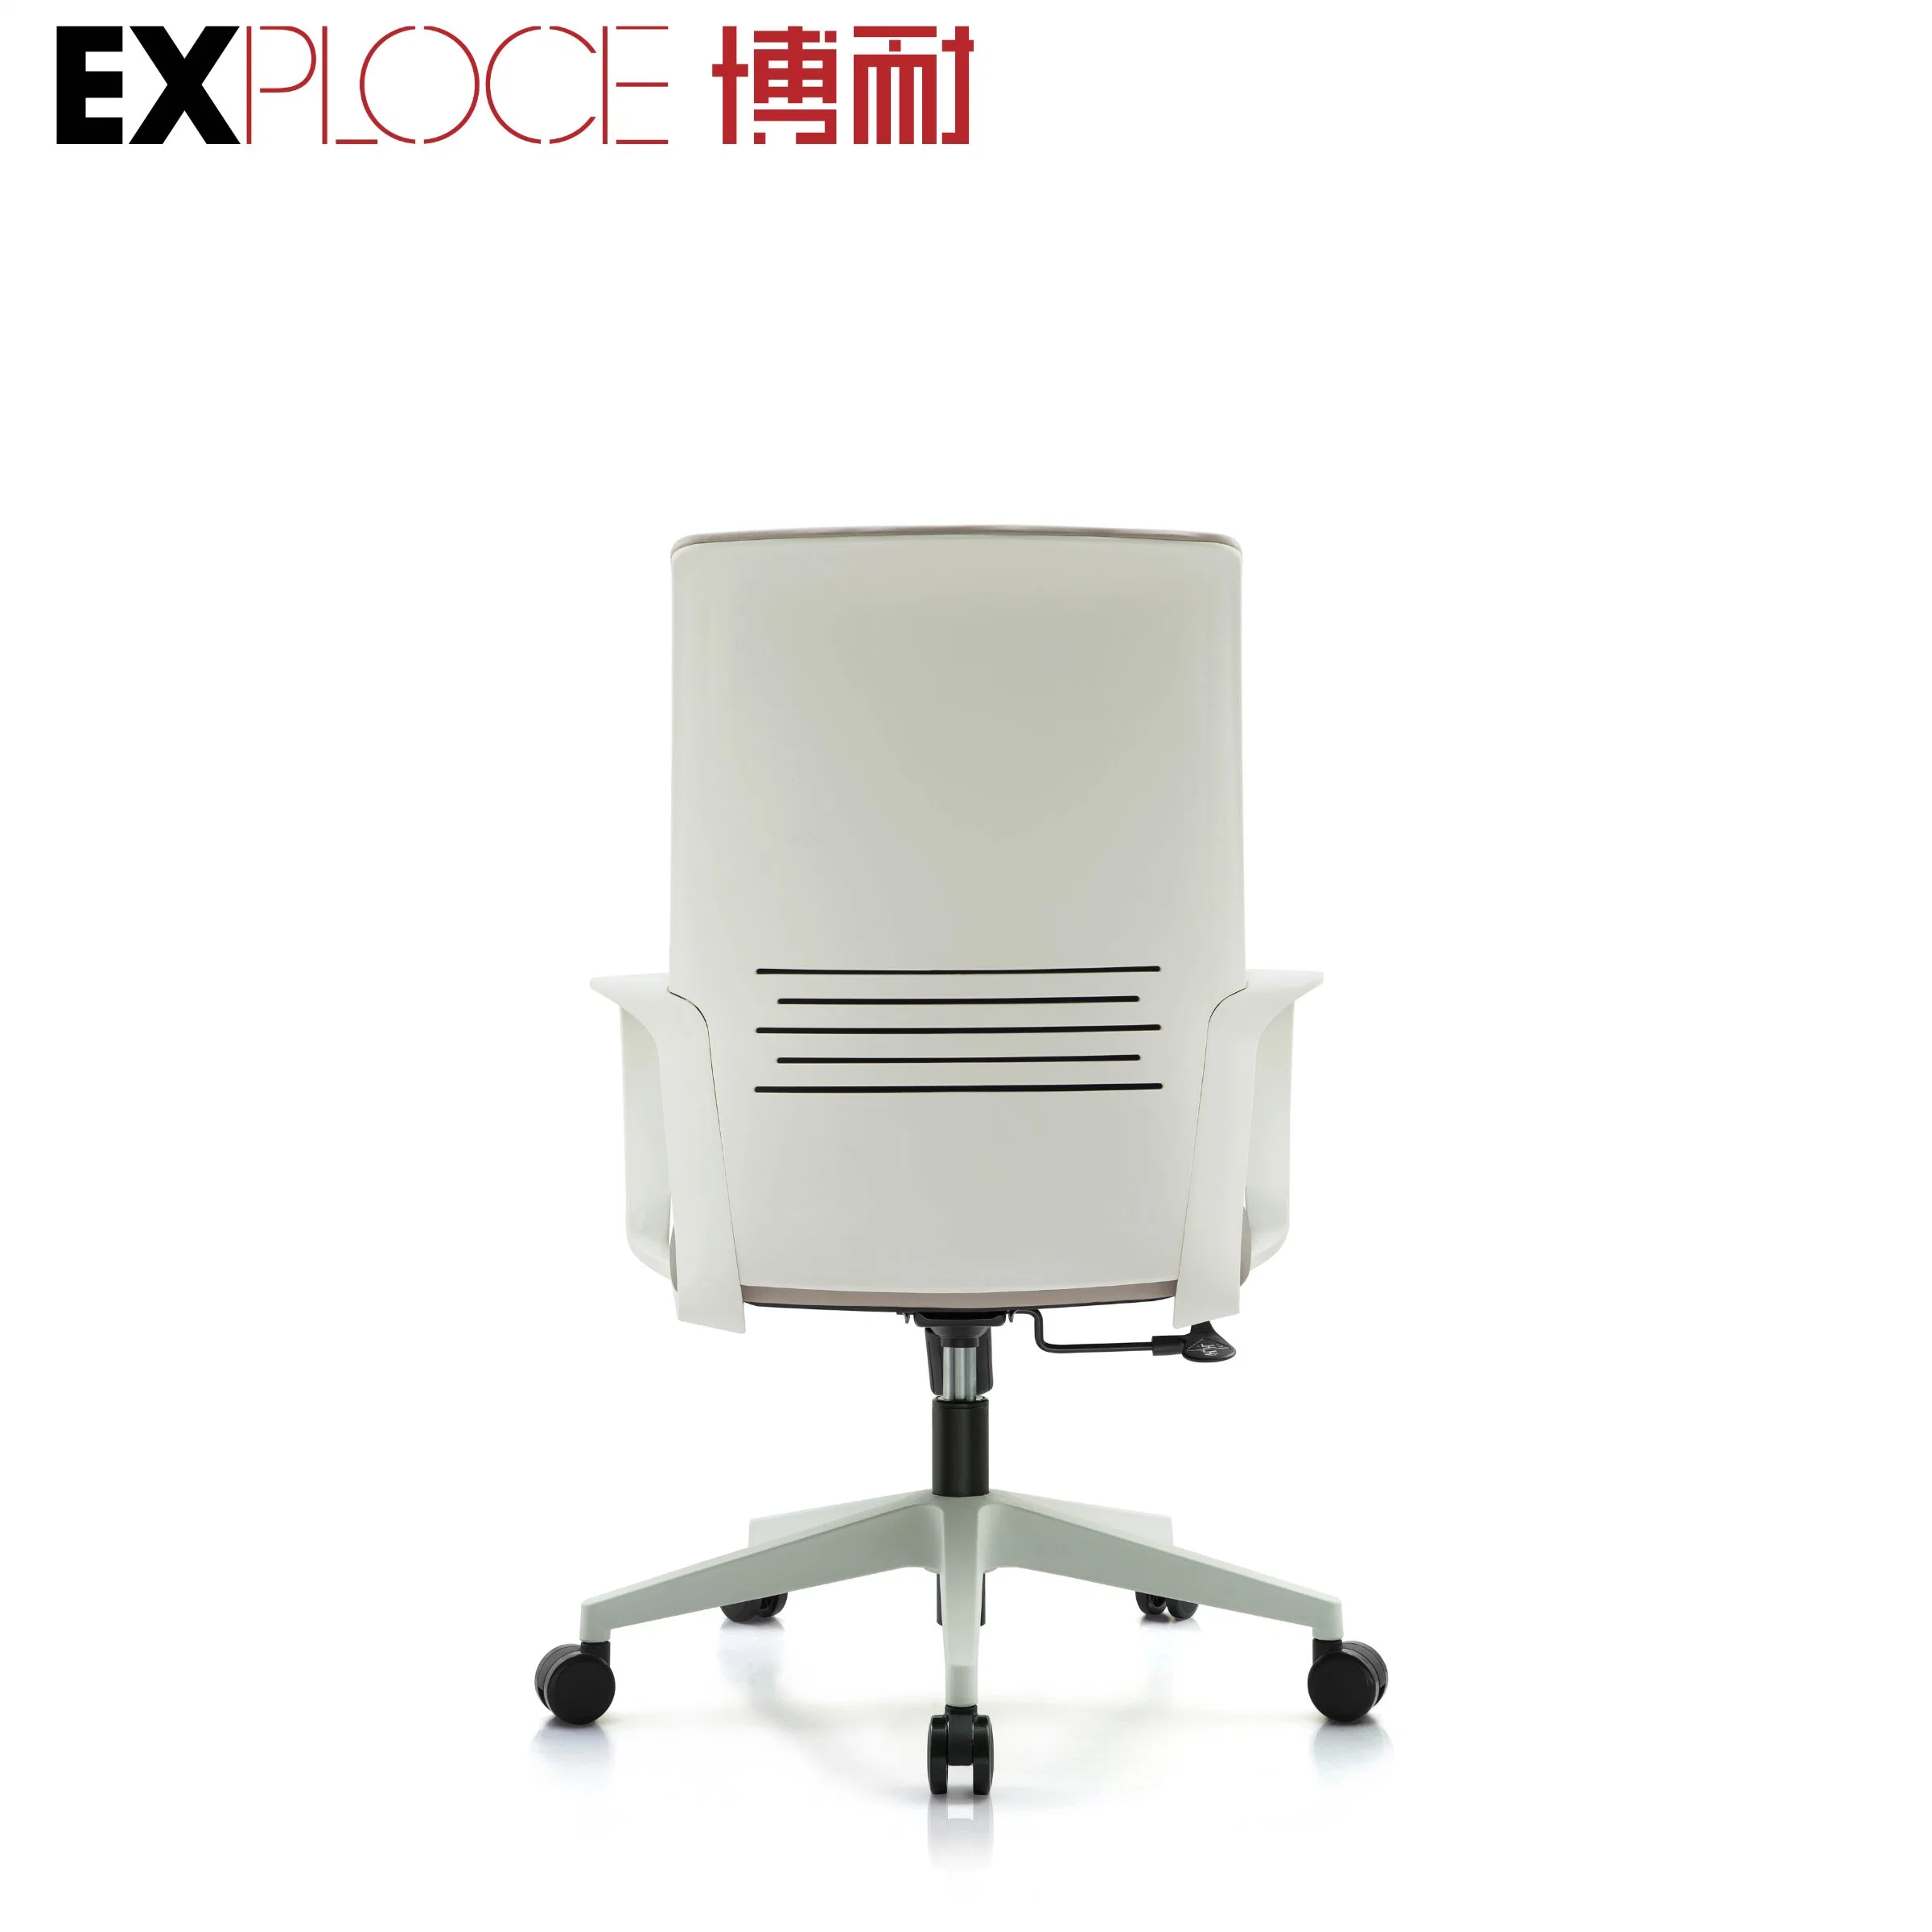 MID Back Hot Sale Armrest Chair Visitor Swivel PU Leather Office Furniture